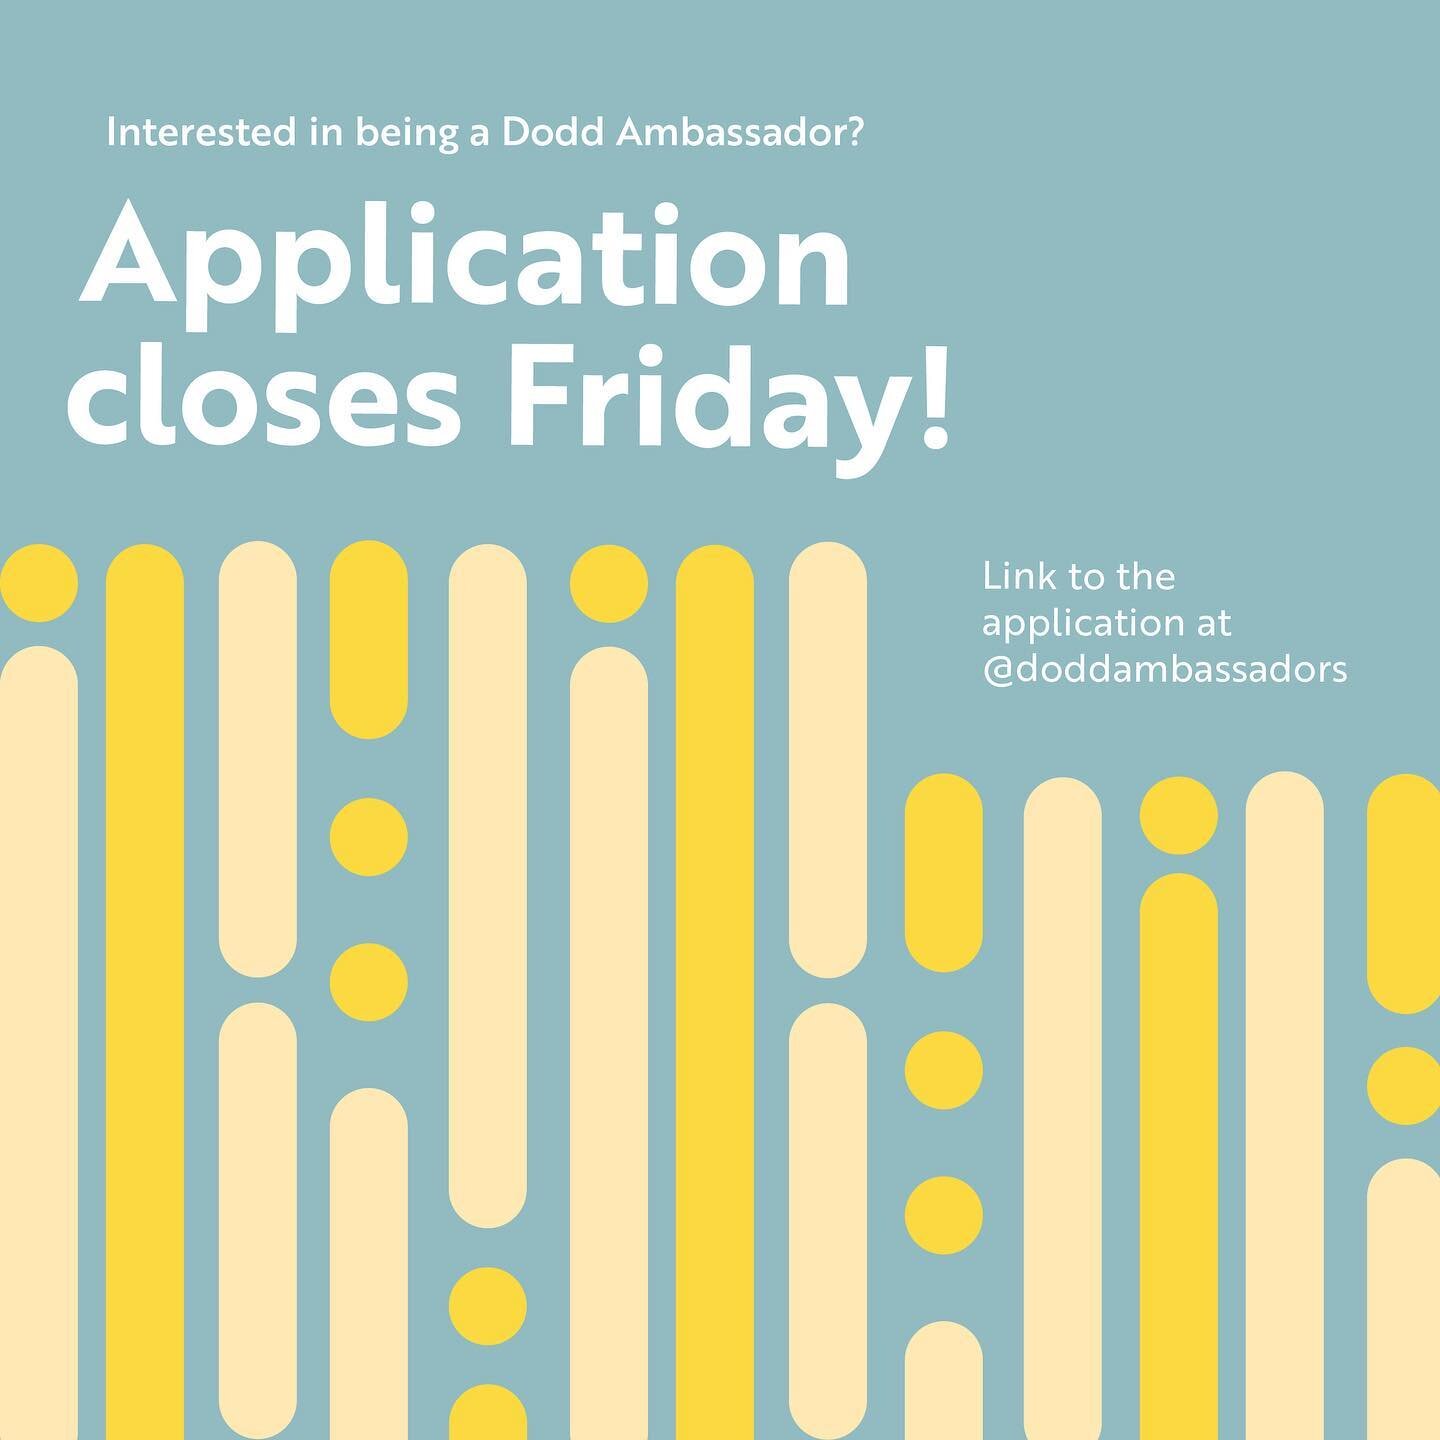 Are you interested in being a Dodd Ambassador? Applications are open until this Friday, March 17th. The link to the form is in @doddambassadors bio! Interviews will be held in the following weeks - we cannot wait to meet you!